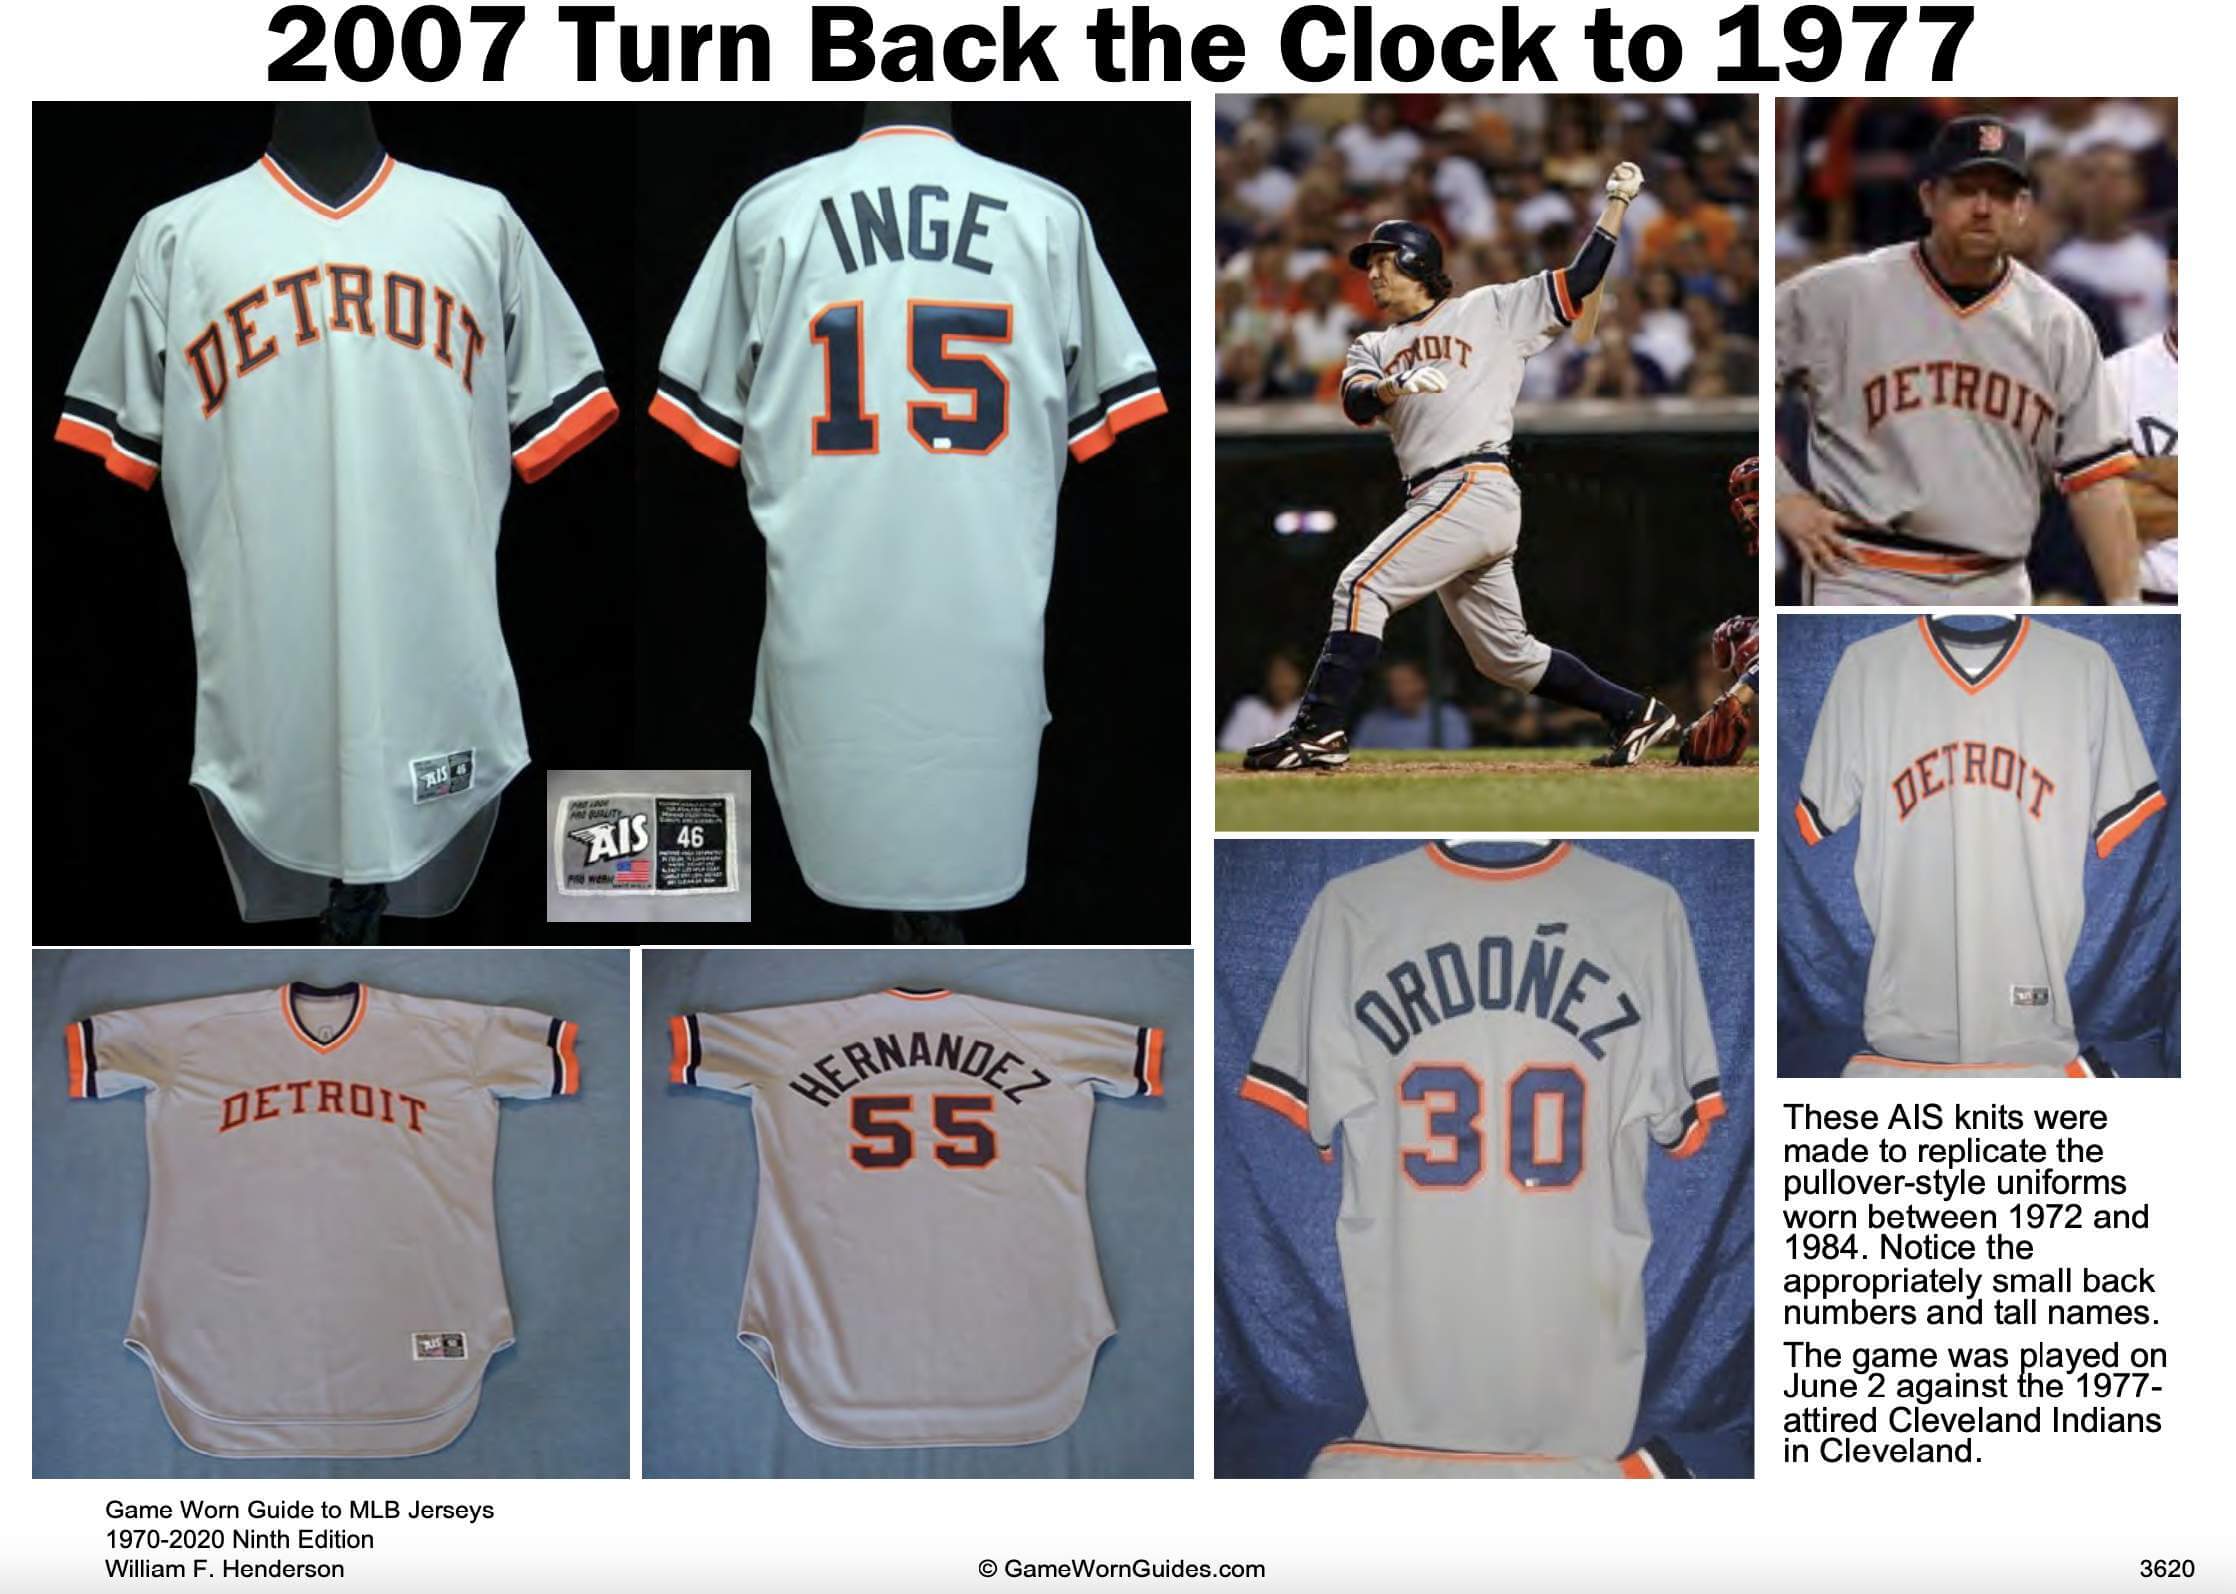 EXCLUSIVE: Tigers Focus-Grouping New Throwbacks